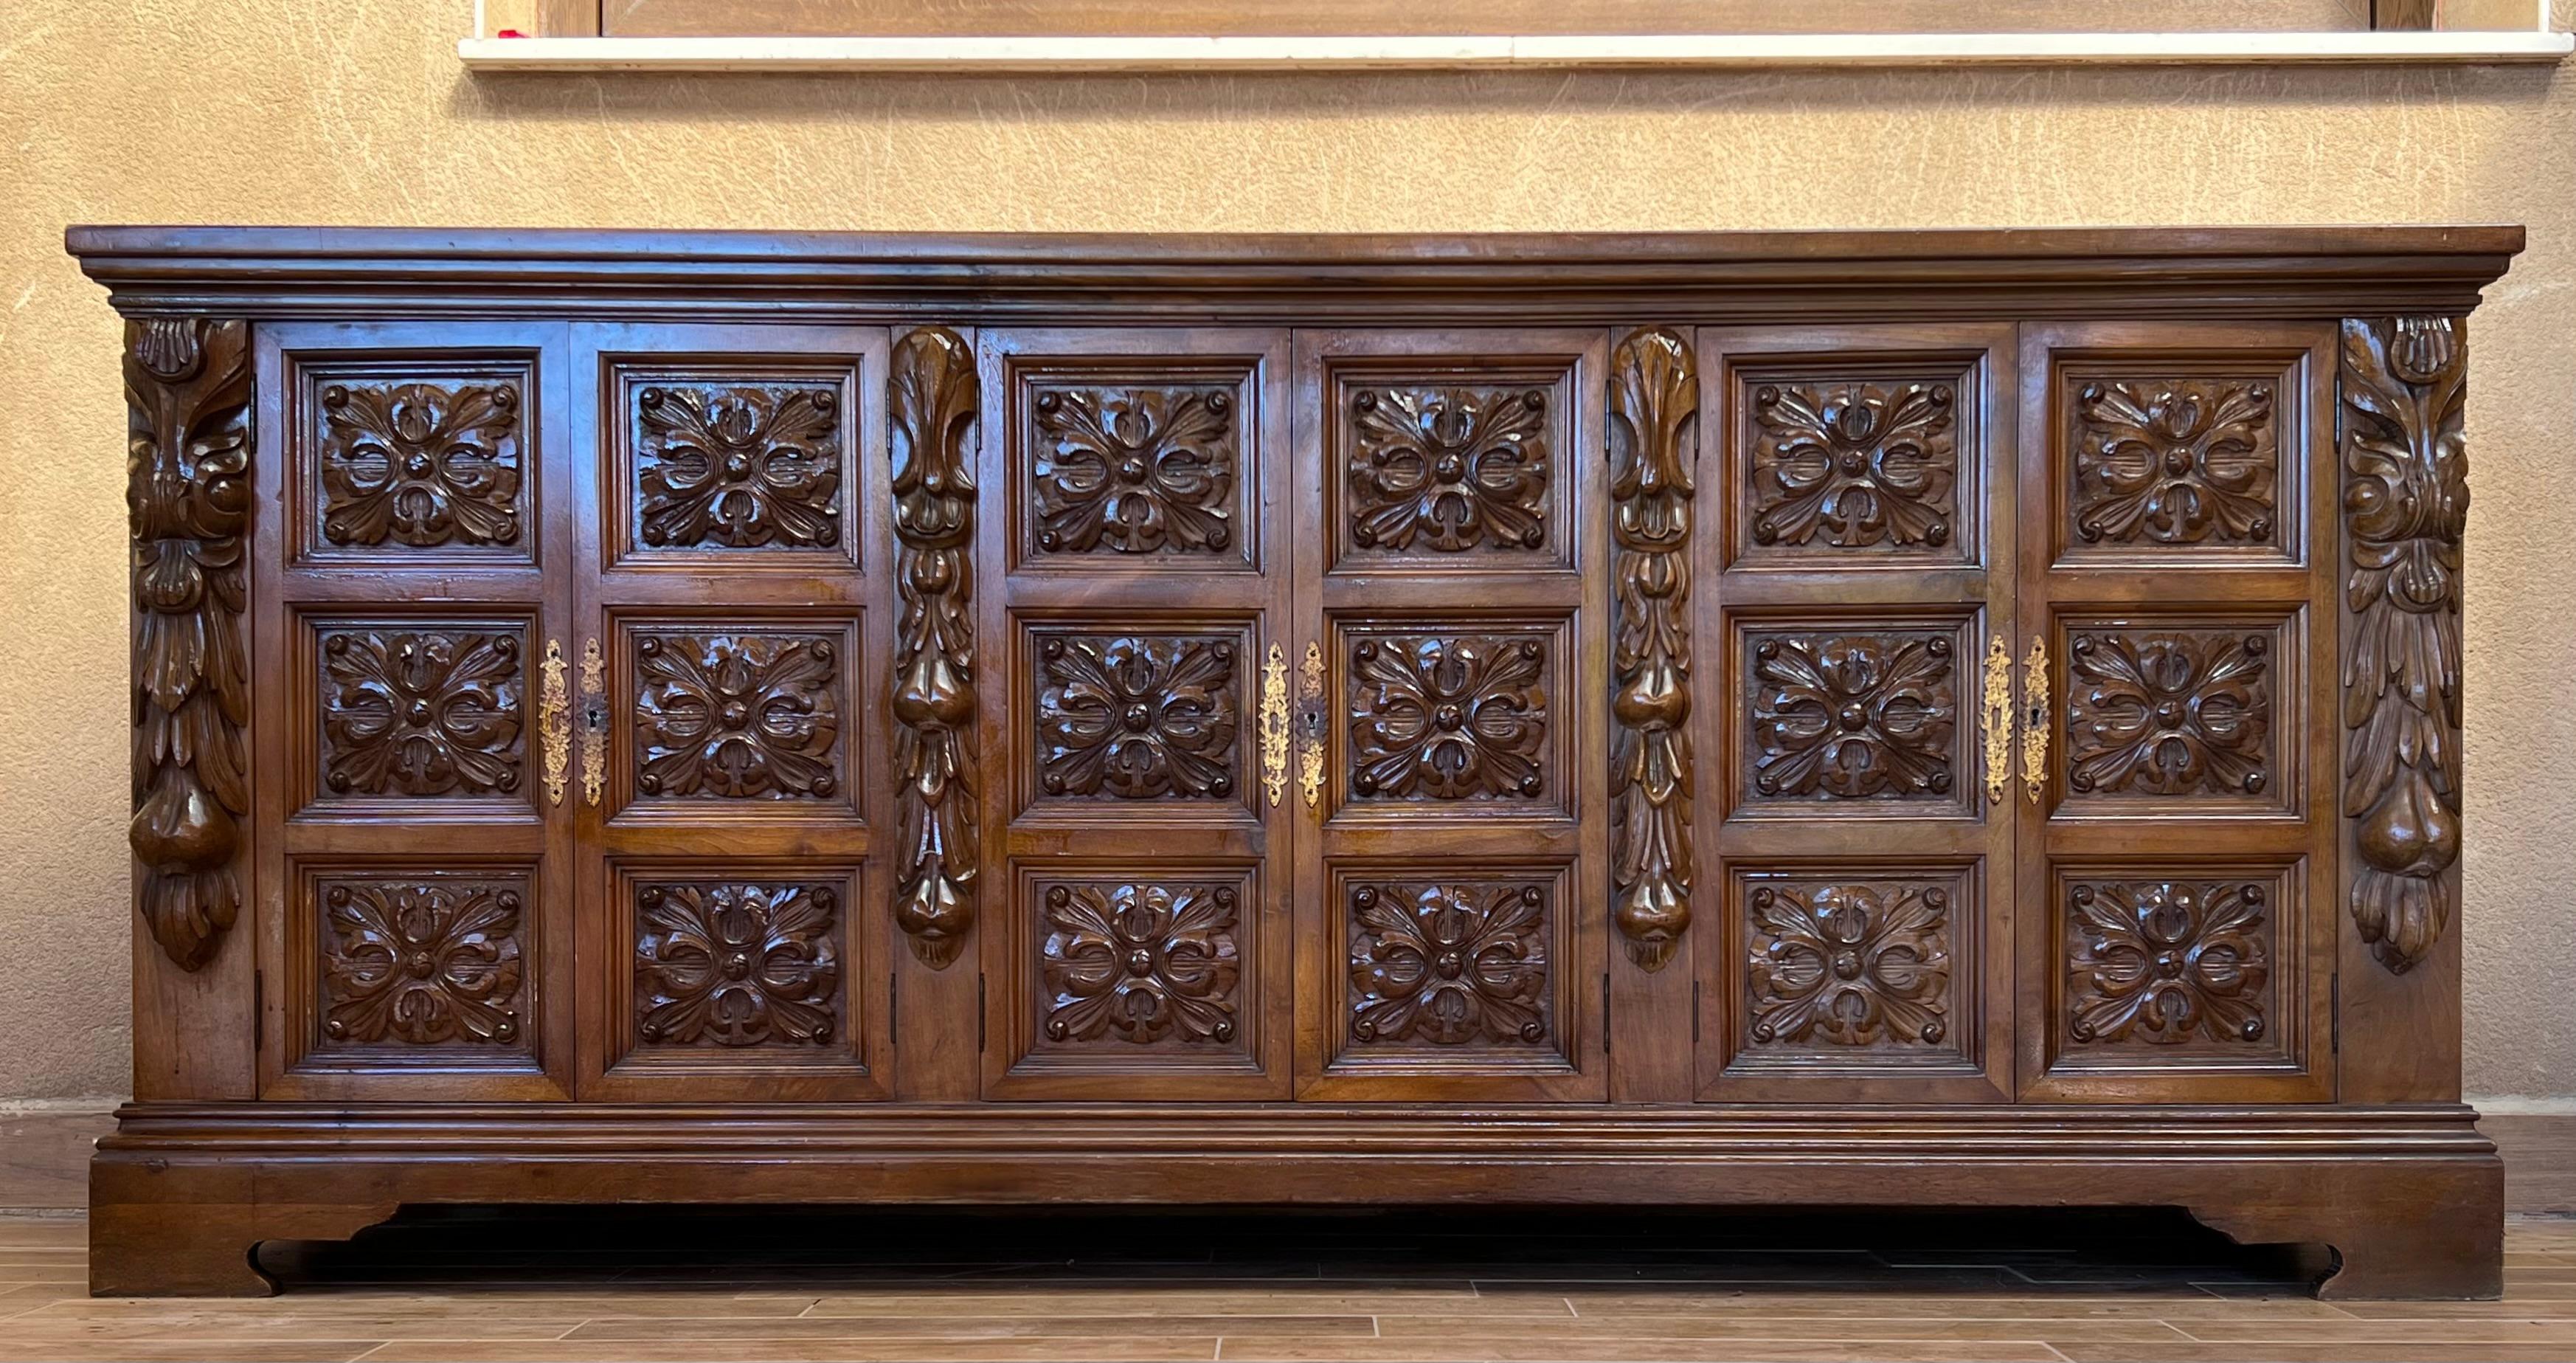 Antique Spanish Carved Walnut Sideboard with Florals Reliefs, circa 1870-1880 For Sale 1